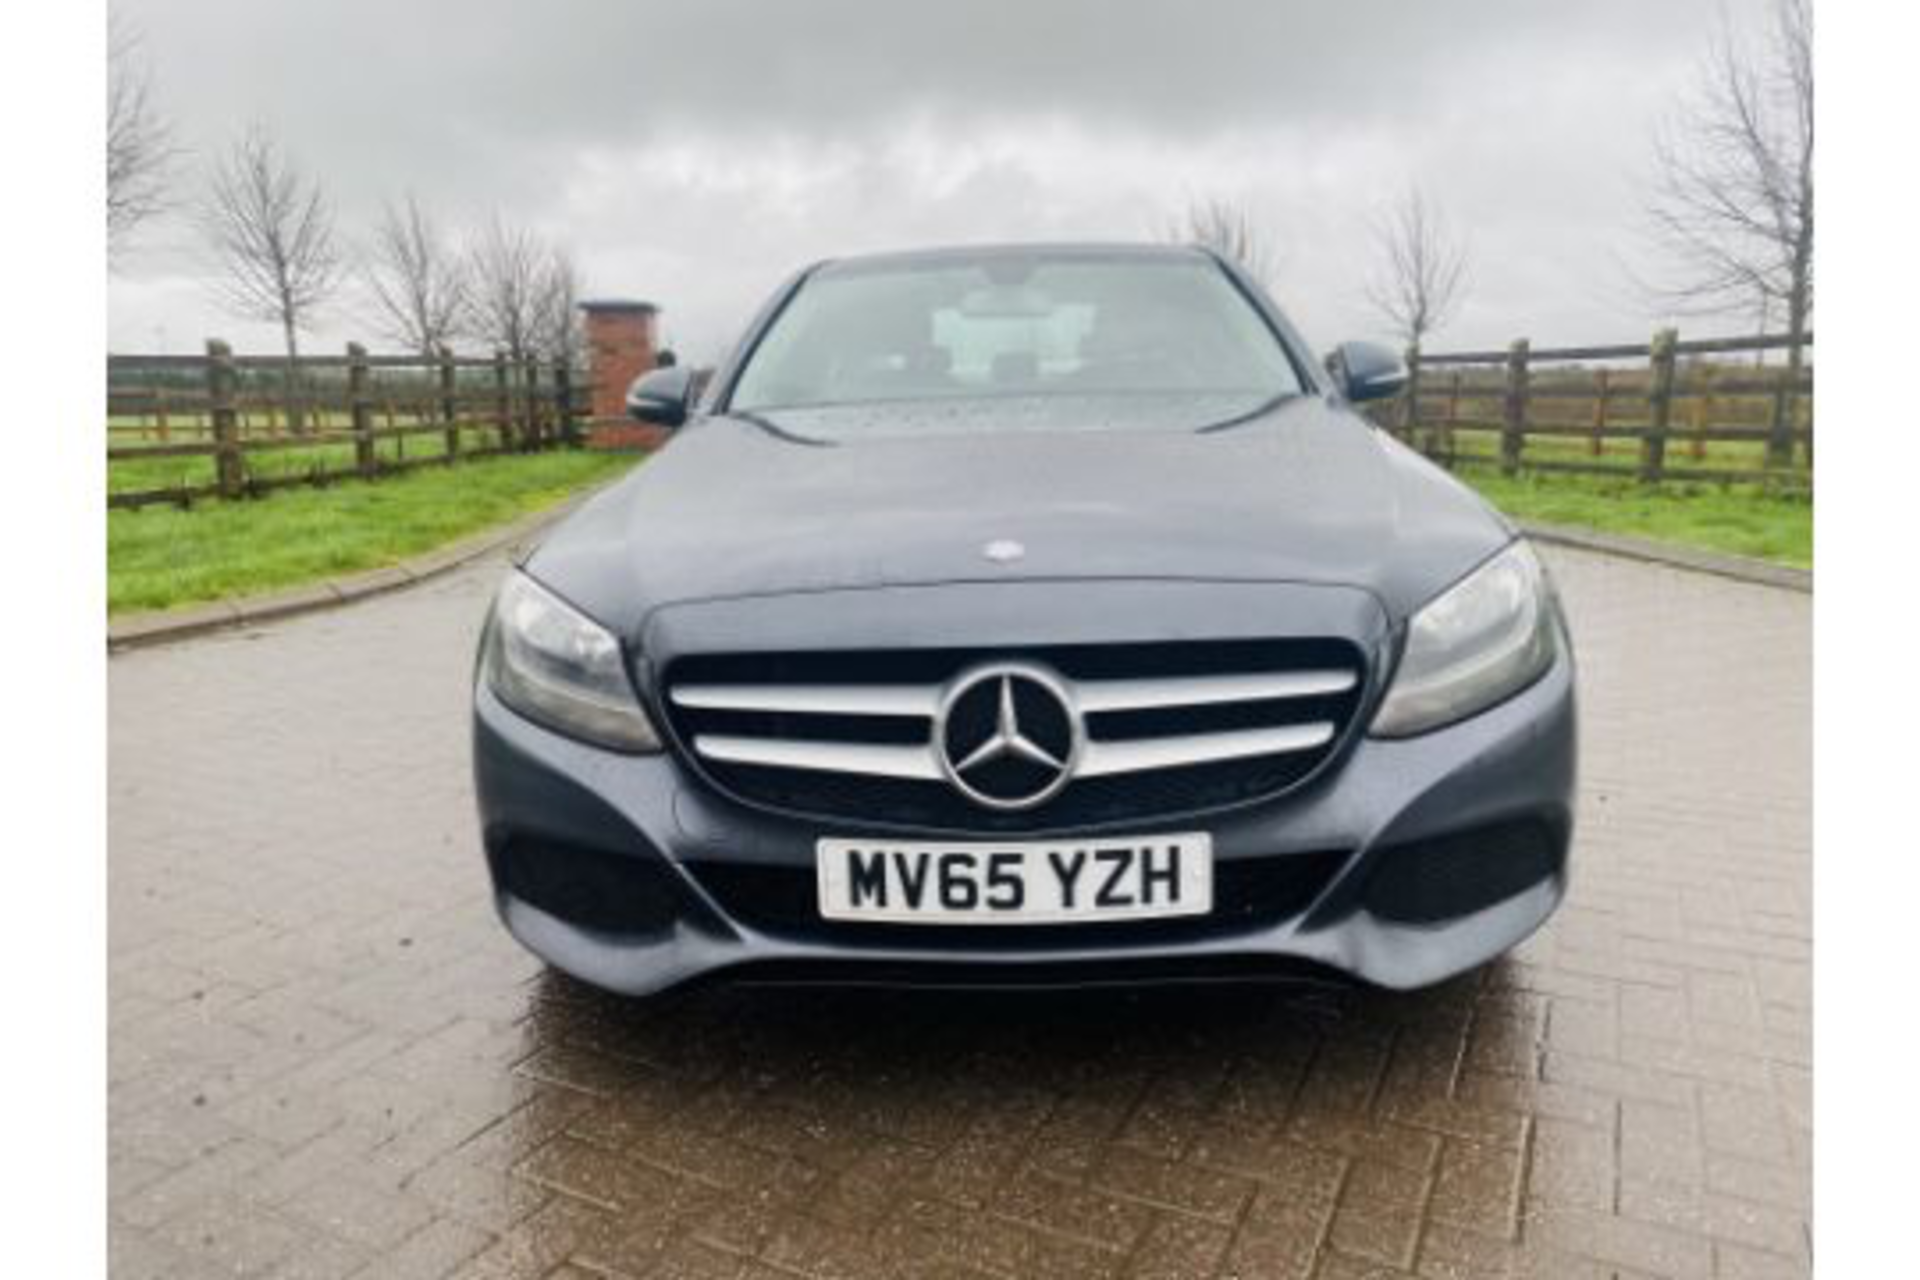 MERCEDES C220d "SPECIAL EQUIPMENT" SE SALOON - 2016 MODEL - LEATHER - NEW SHAPE - AIR CON - NO VAT!! - Image 9 of 26